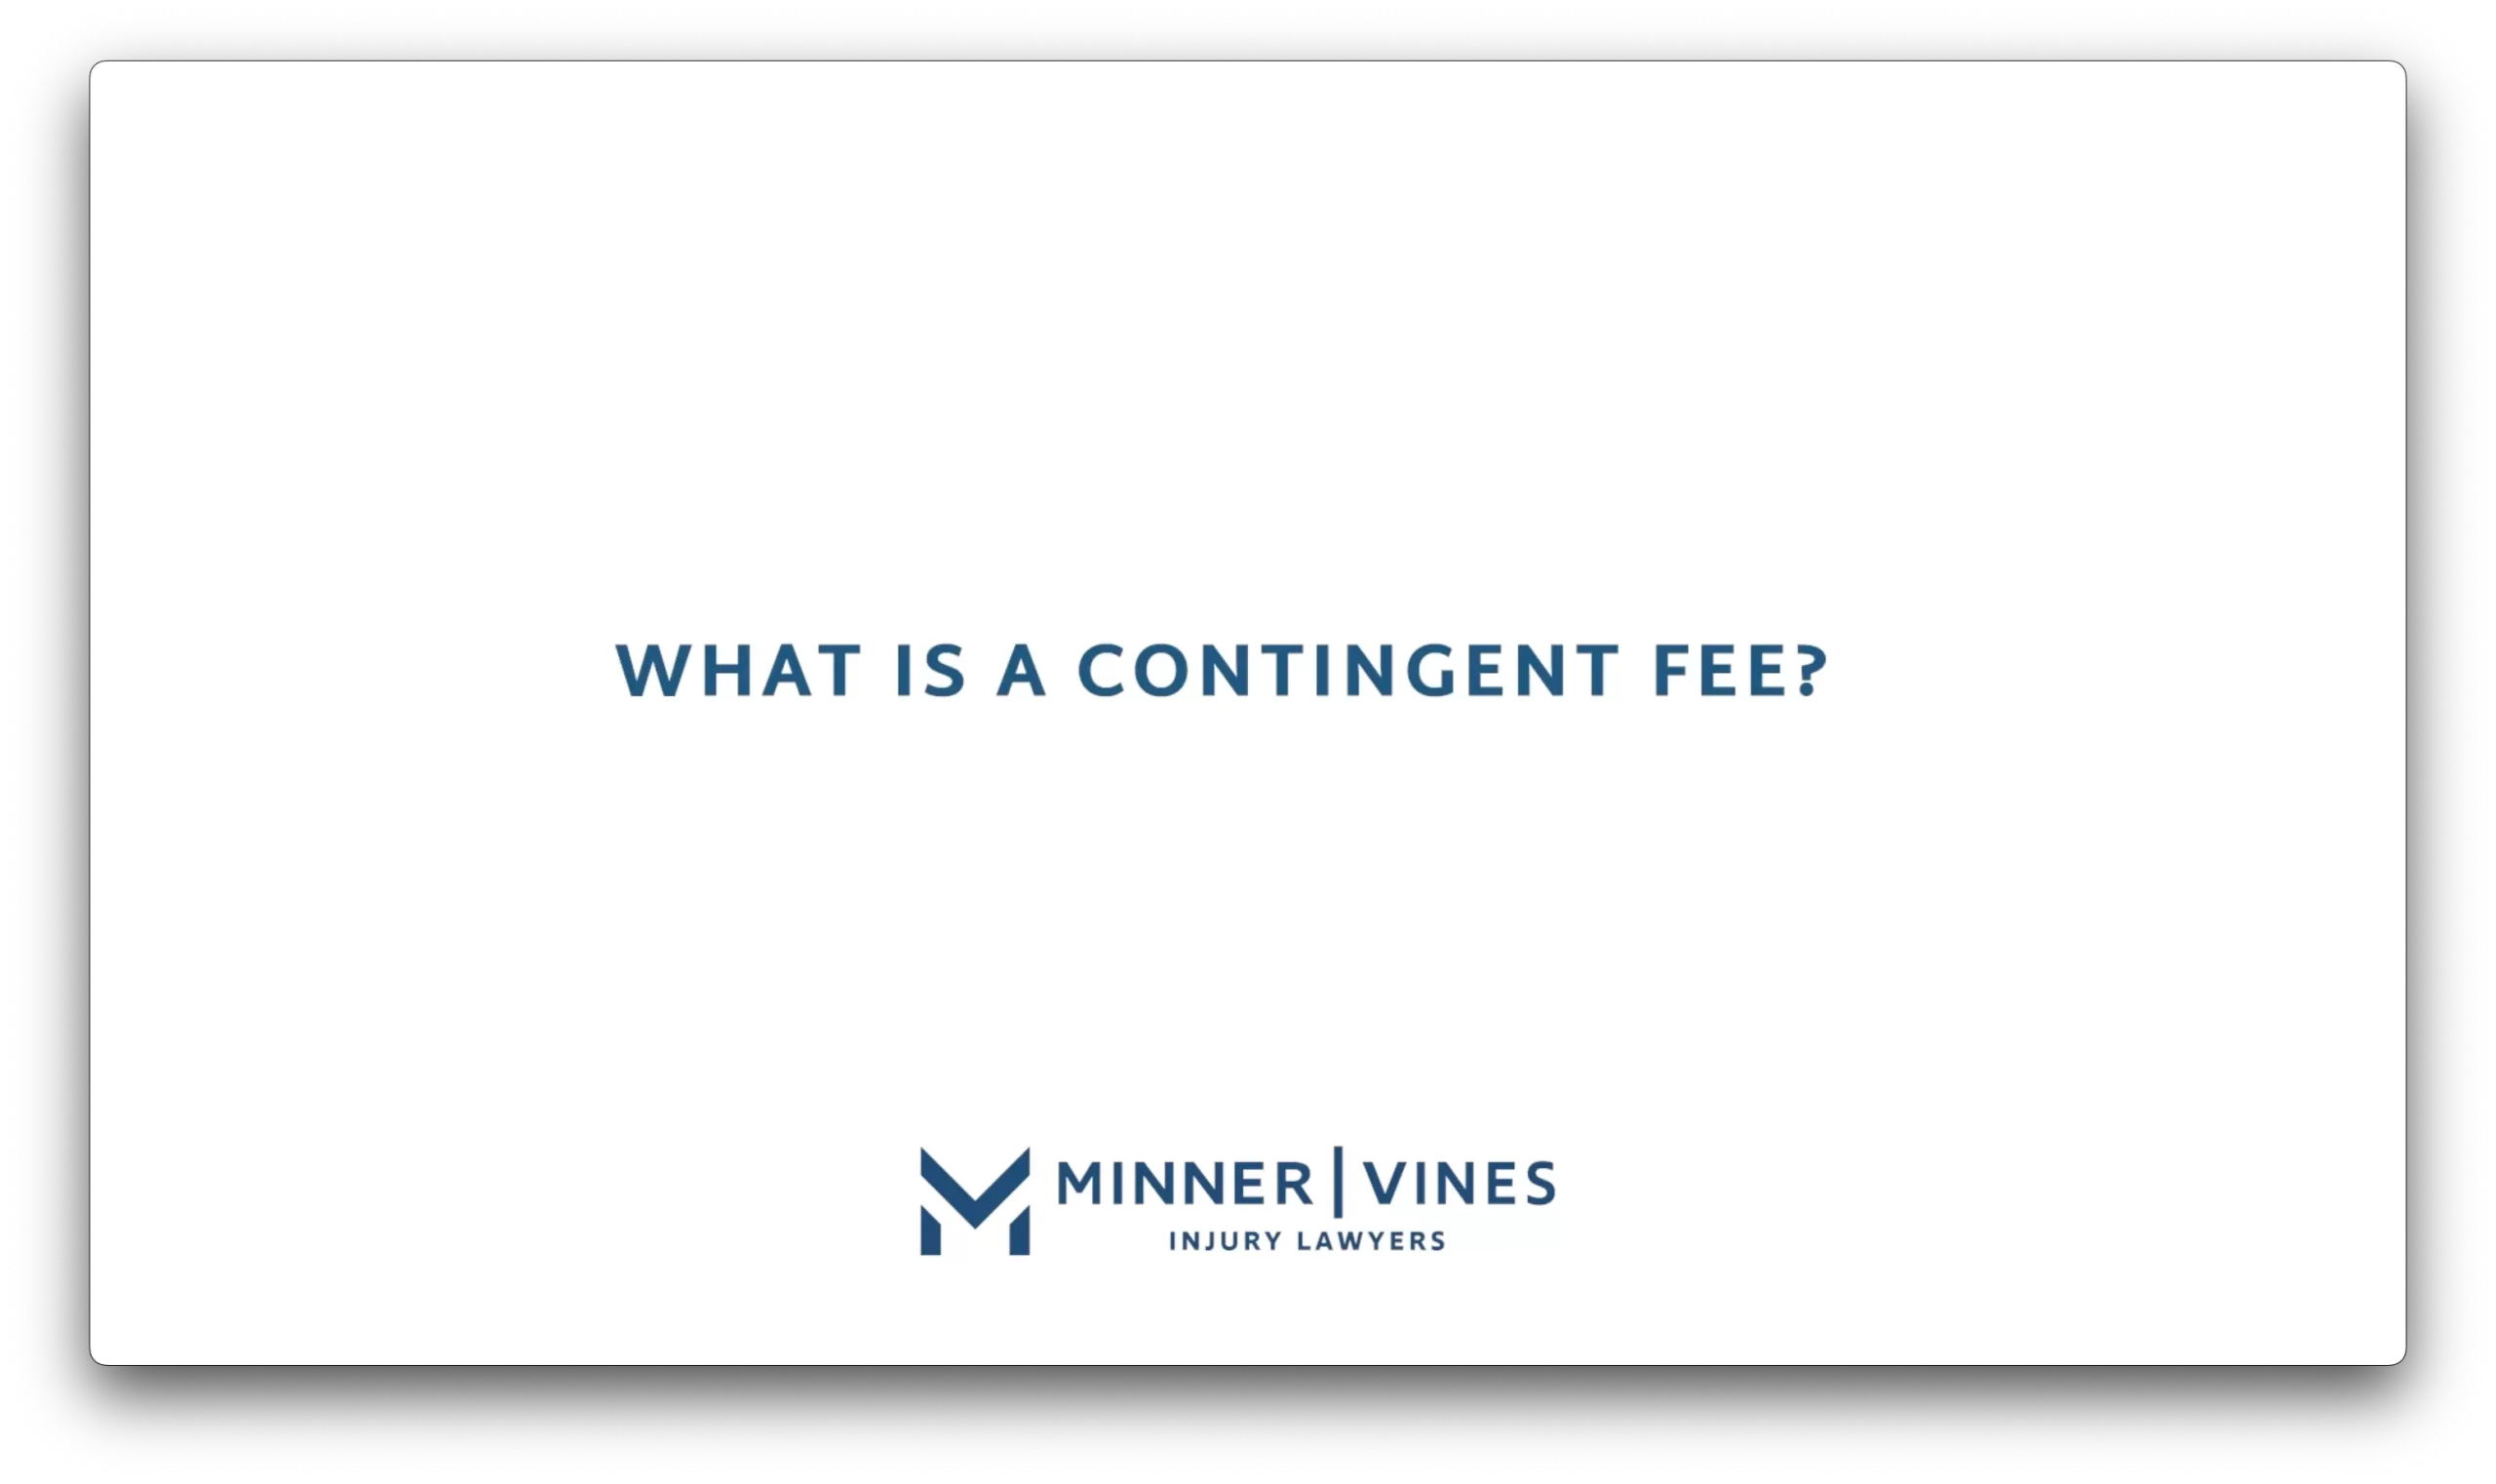 What is a contingent fee?